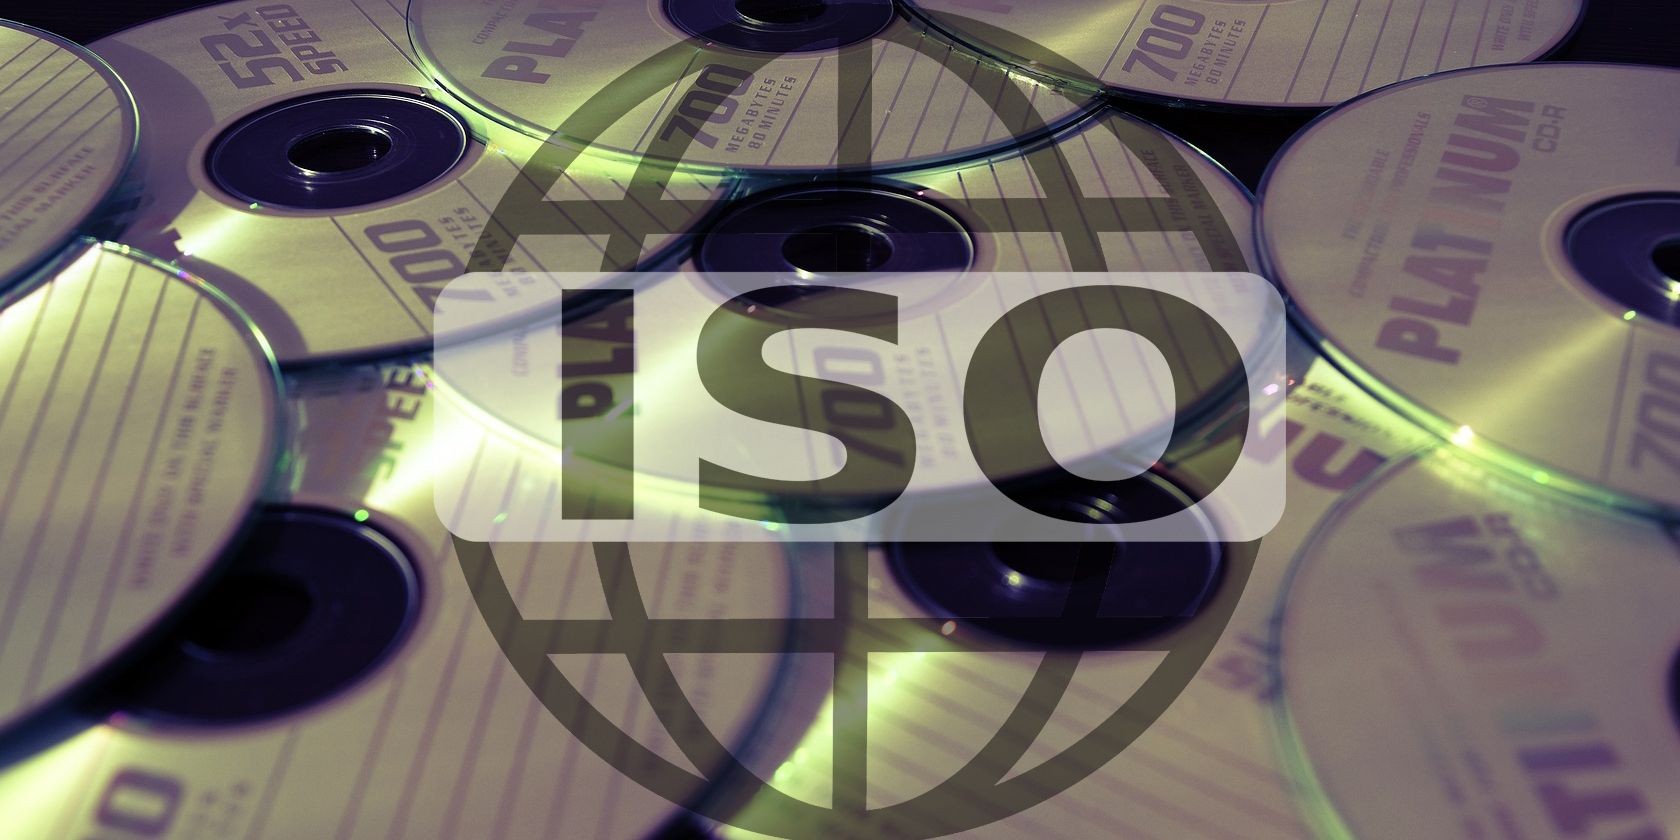 Picture of CDs overlaid with ISO logo